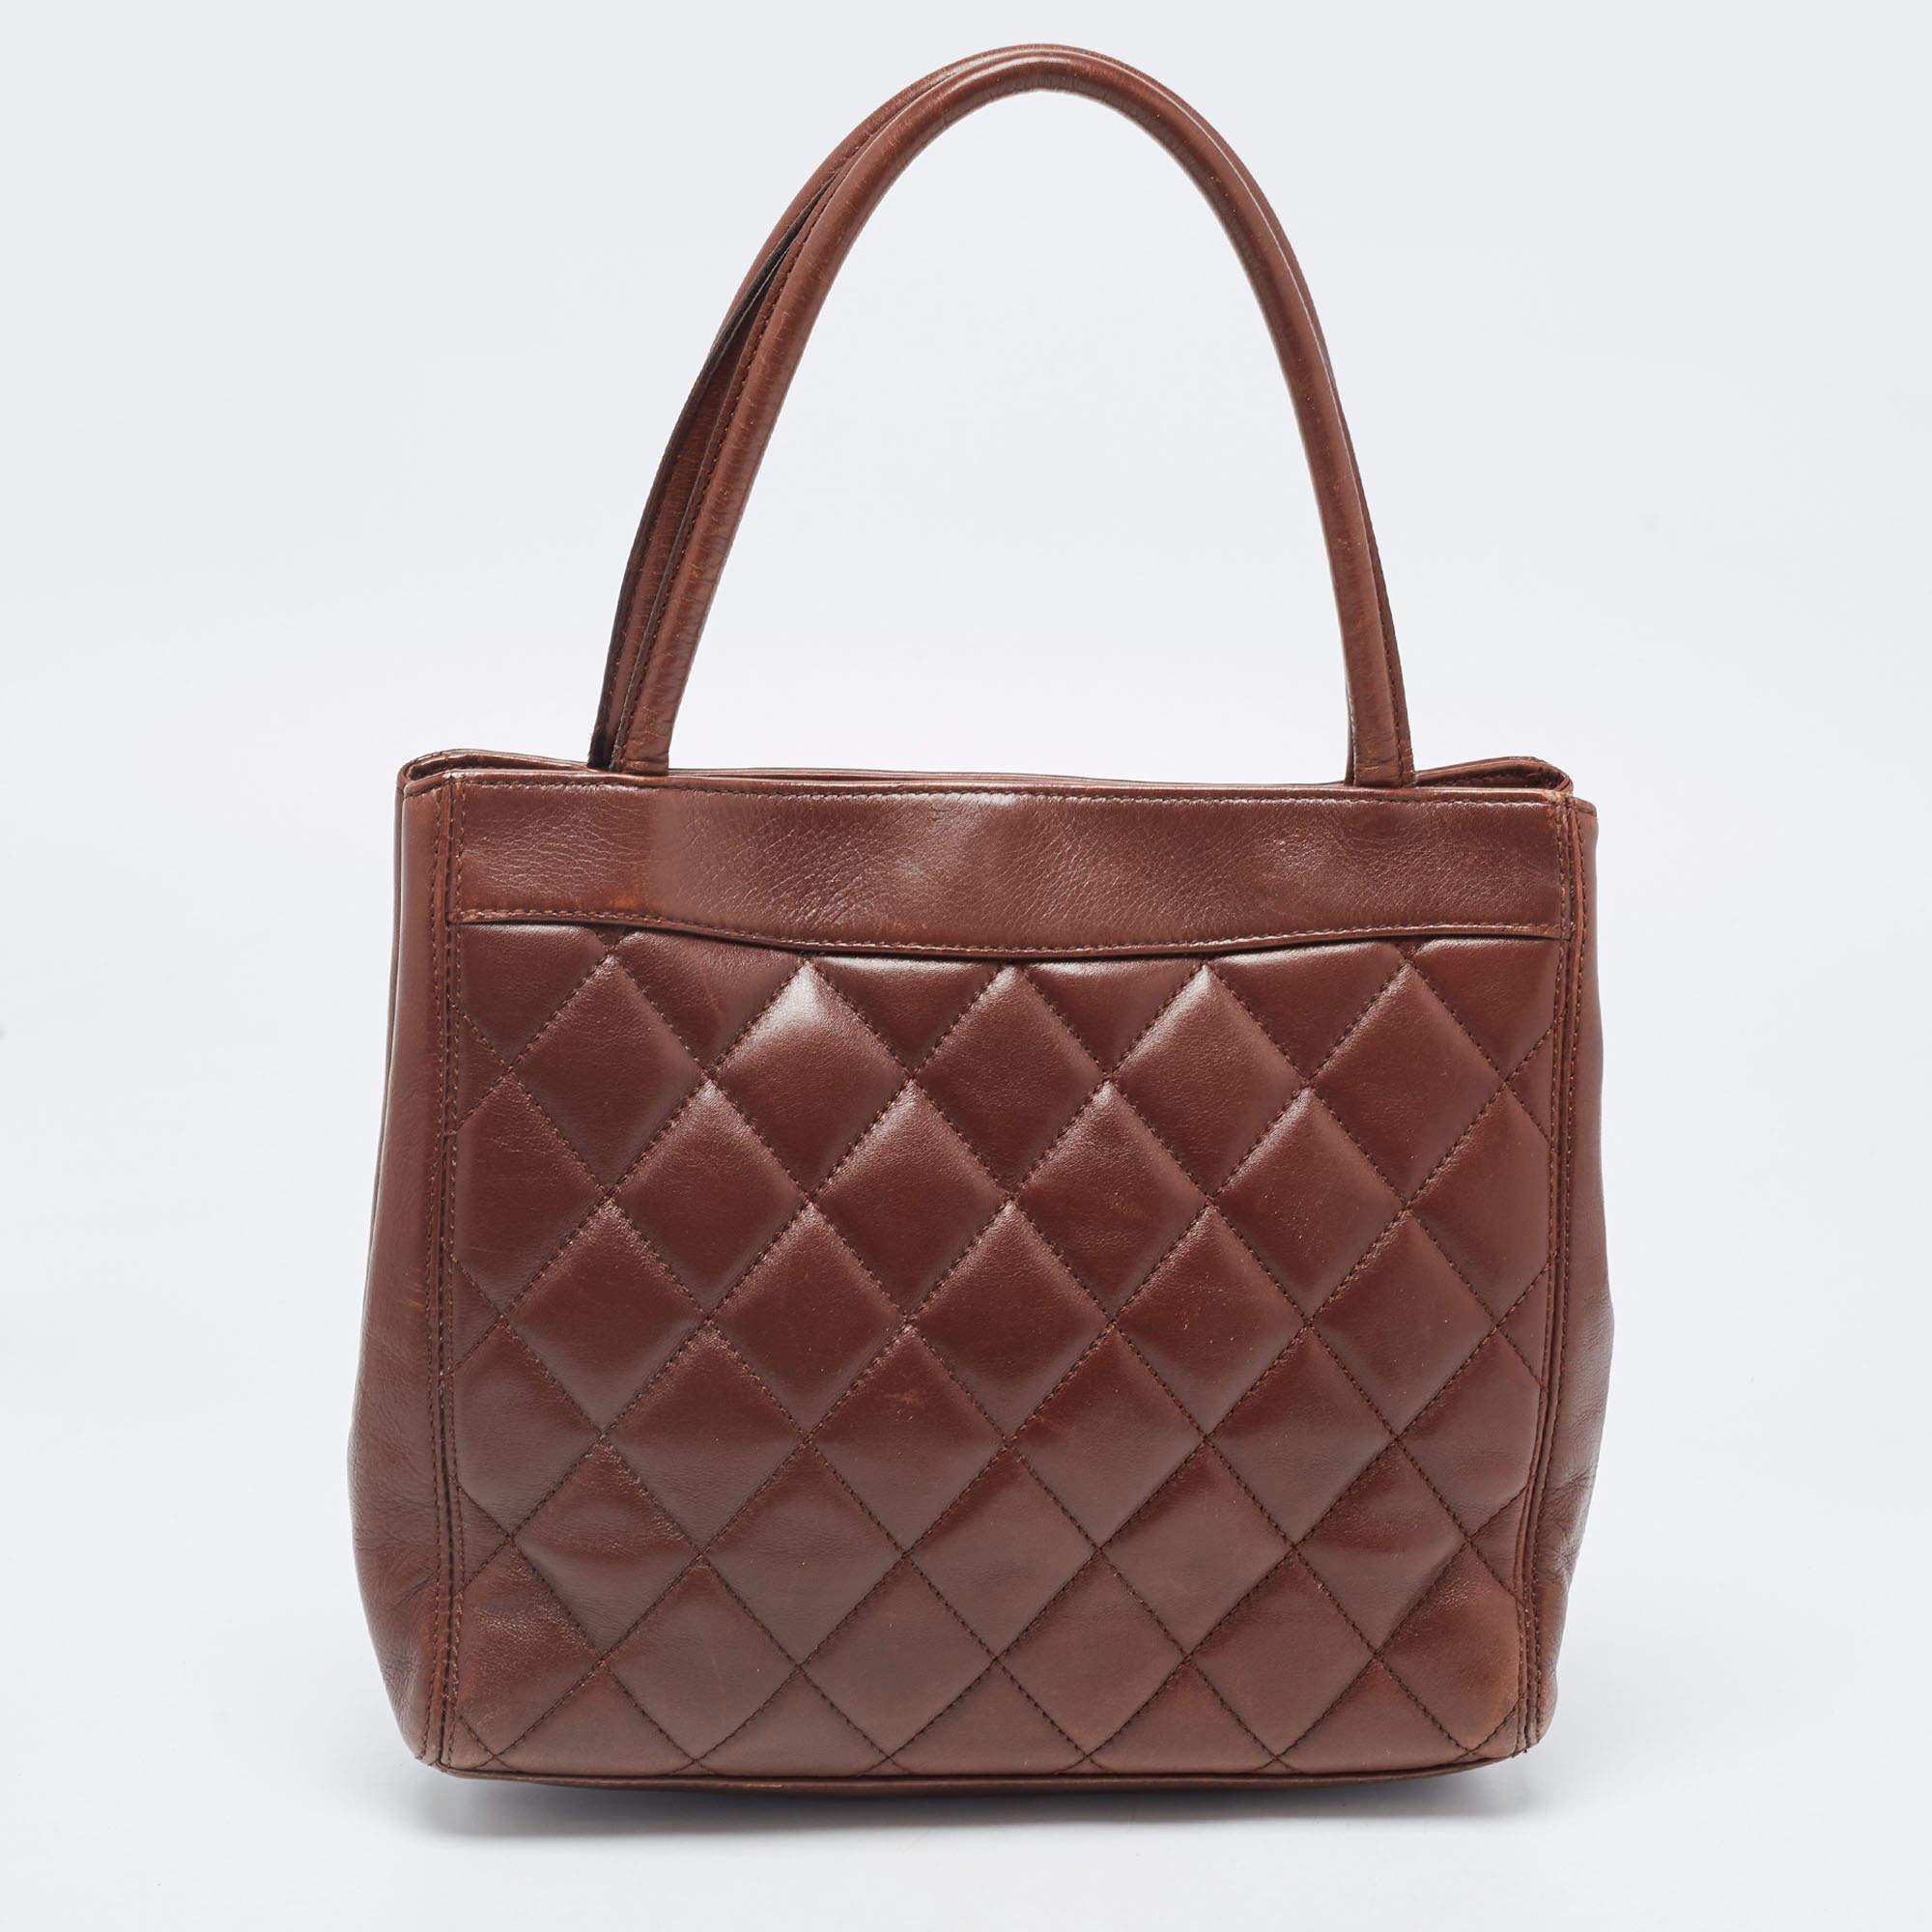 Women's Chanel Brown Quilted Leather Vintage CC Turnlock Tote